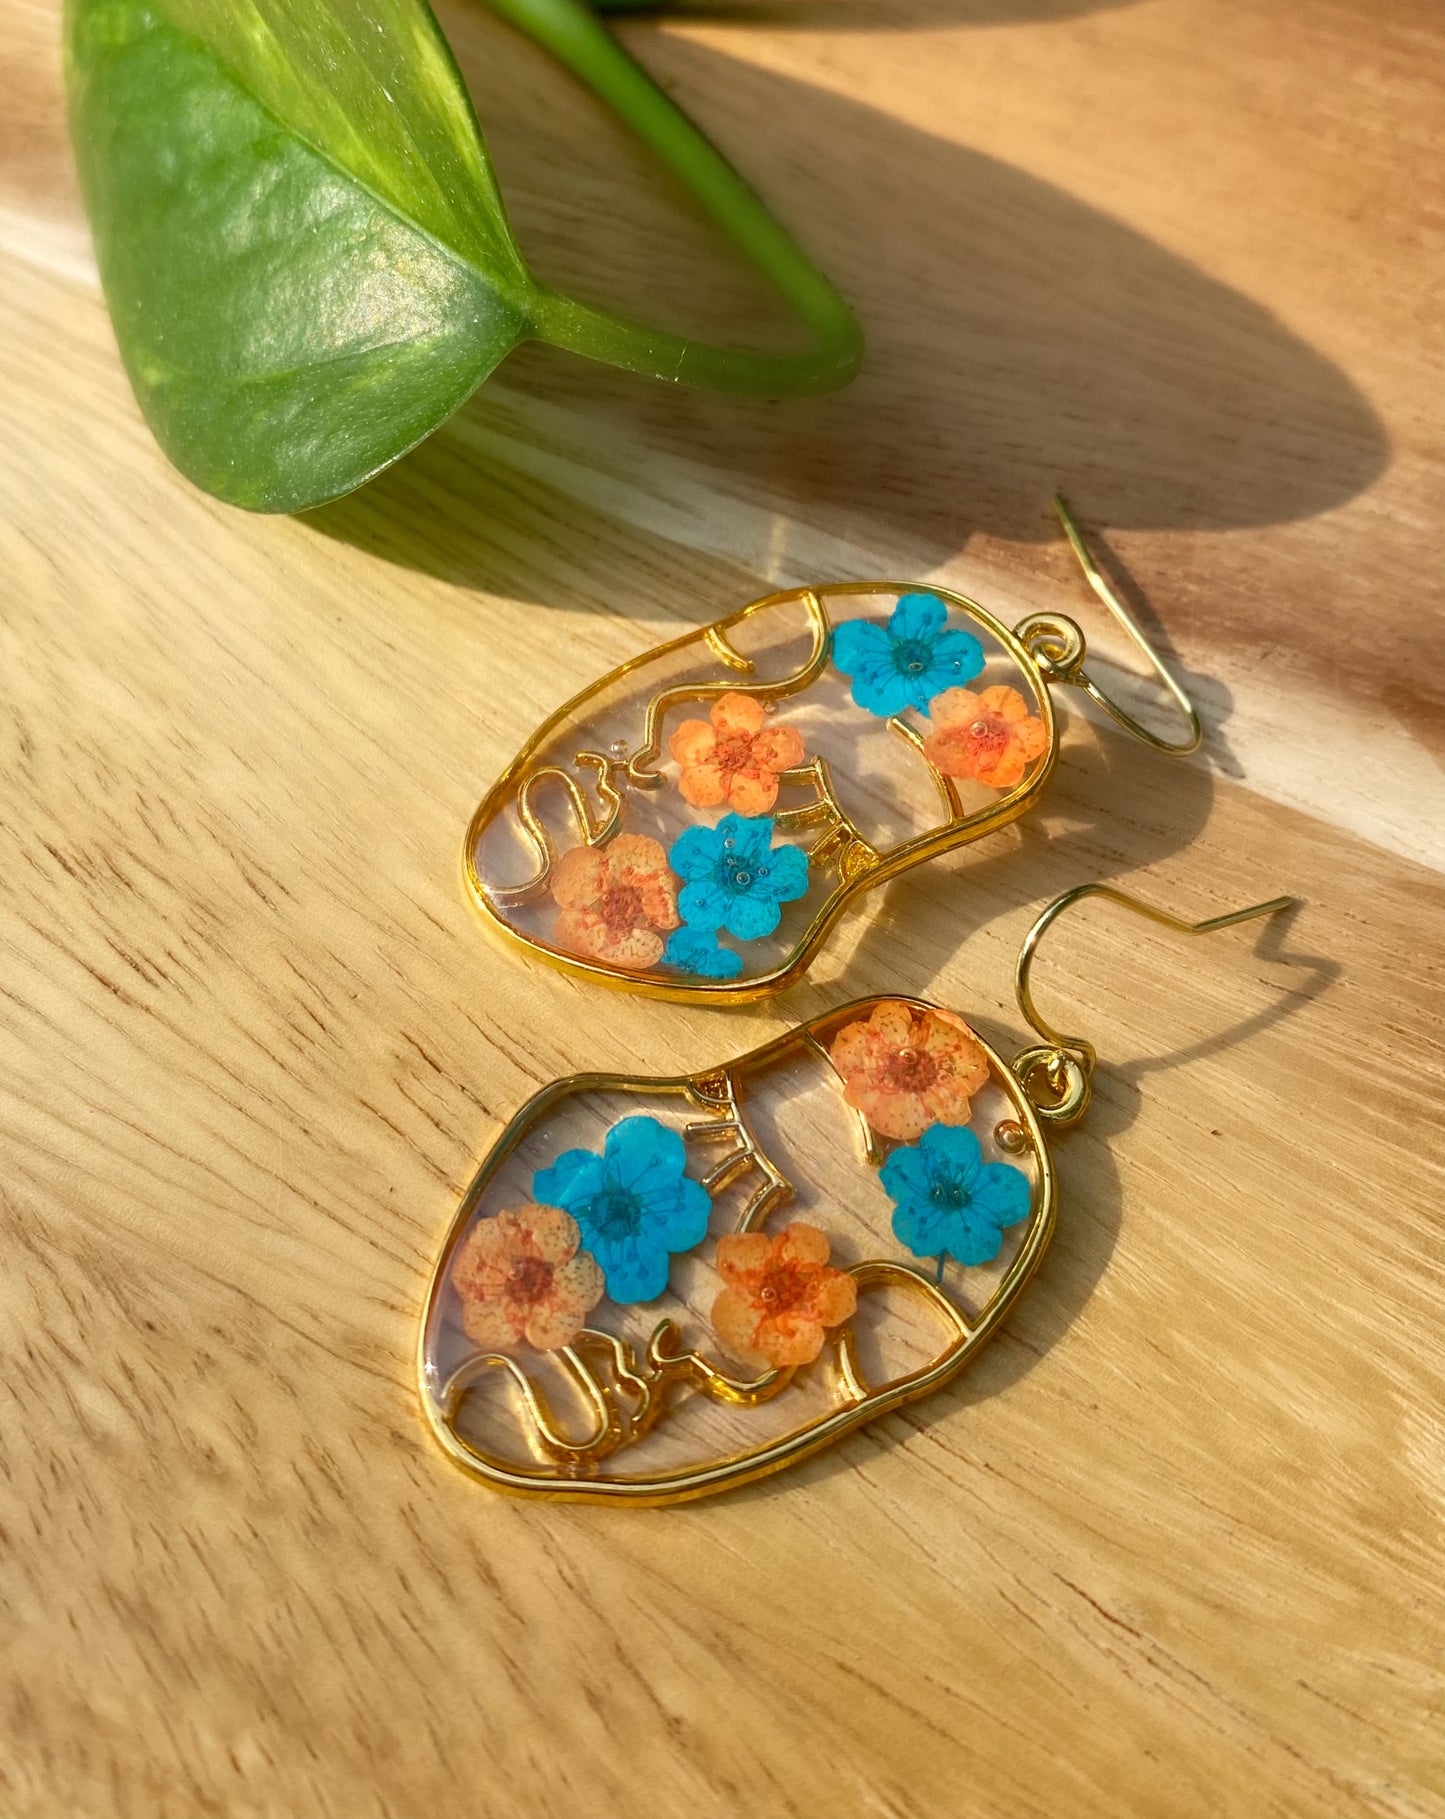 UF Gator Earrings. University of Florida. Orange and Blue. Made with real pressed flowers.  Hypoallergenic Earrings. 14K gold.